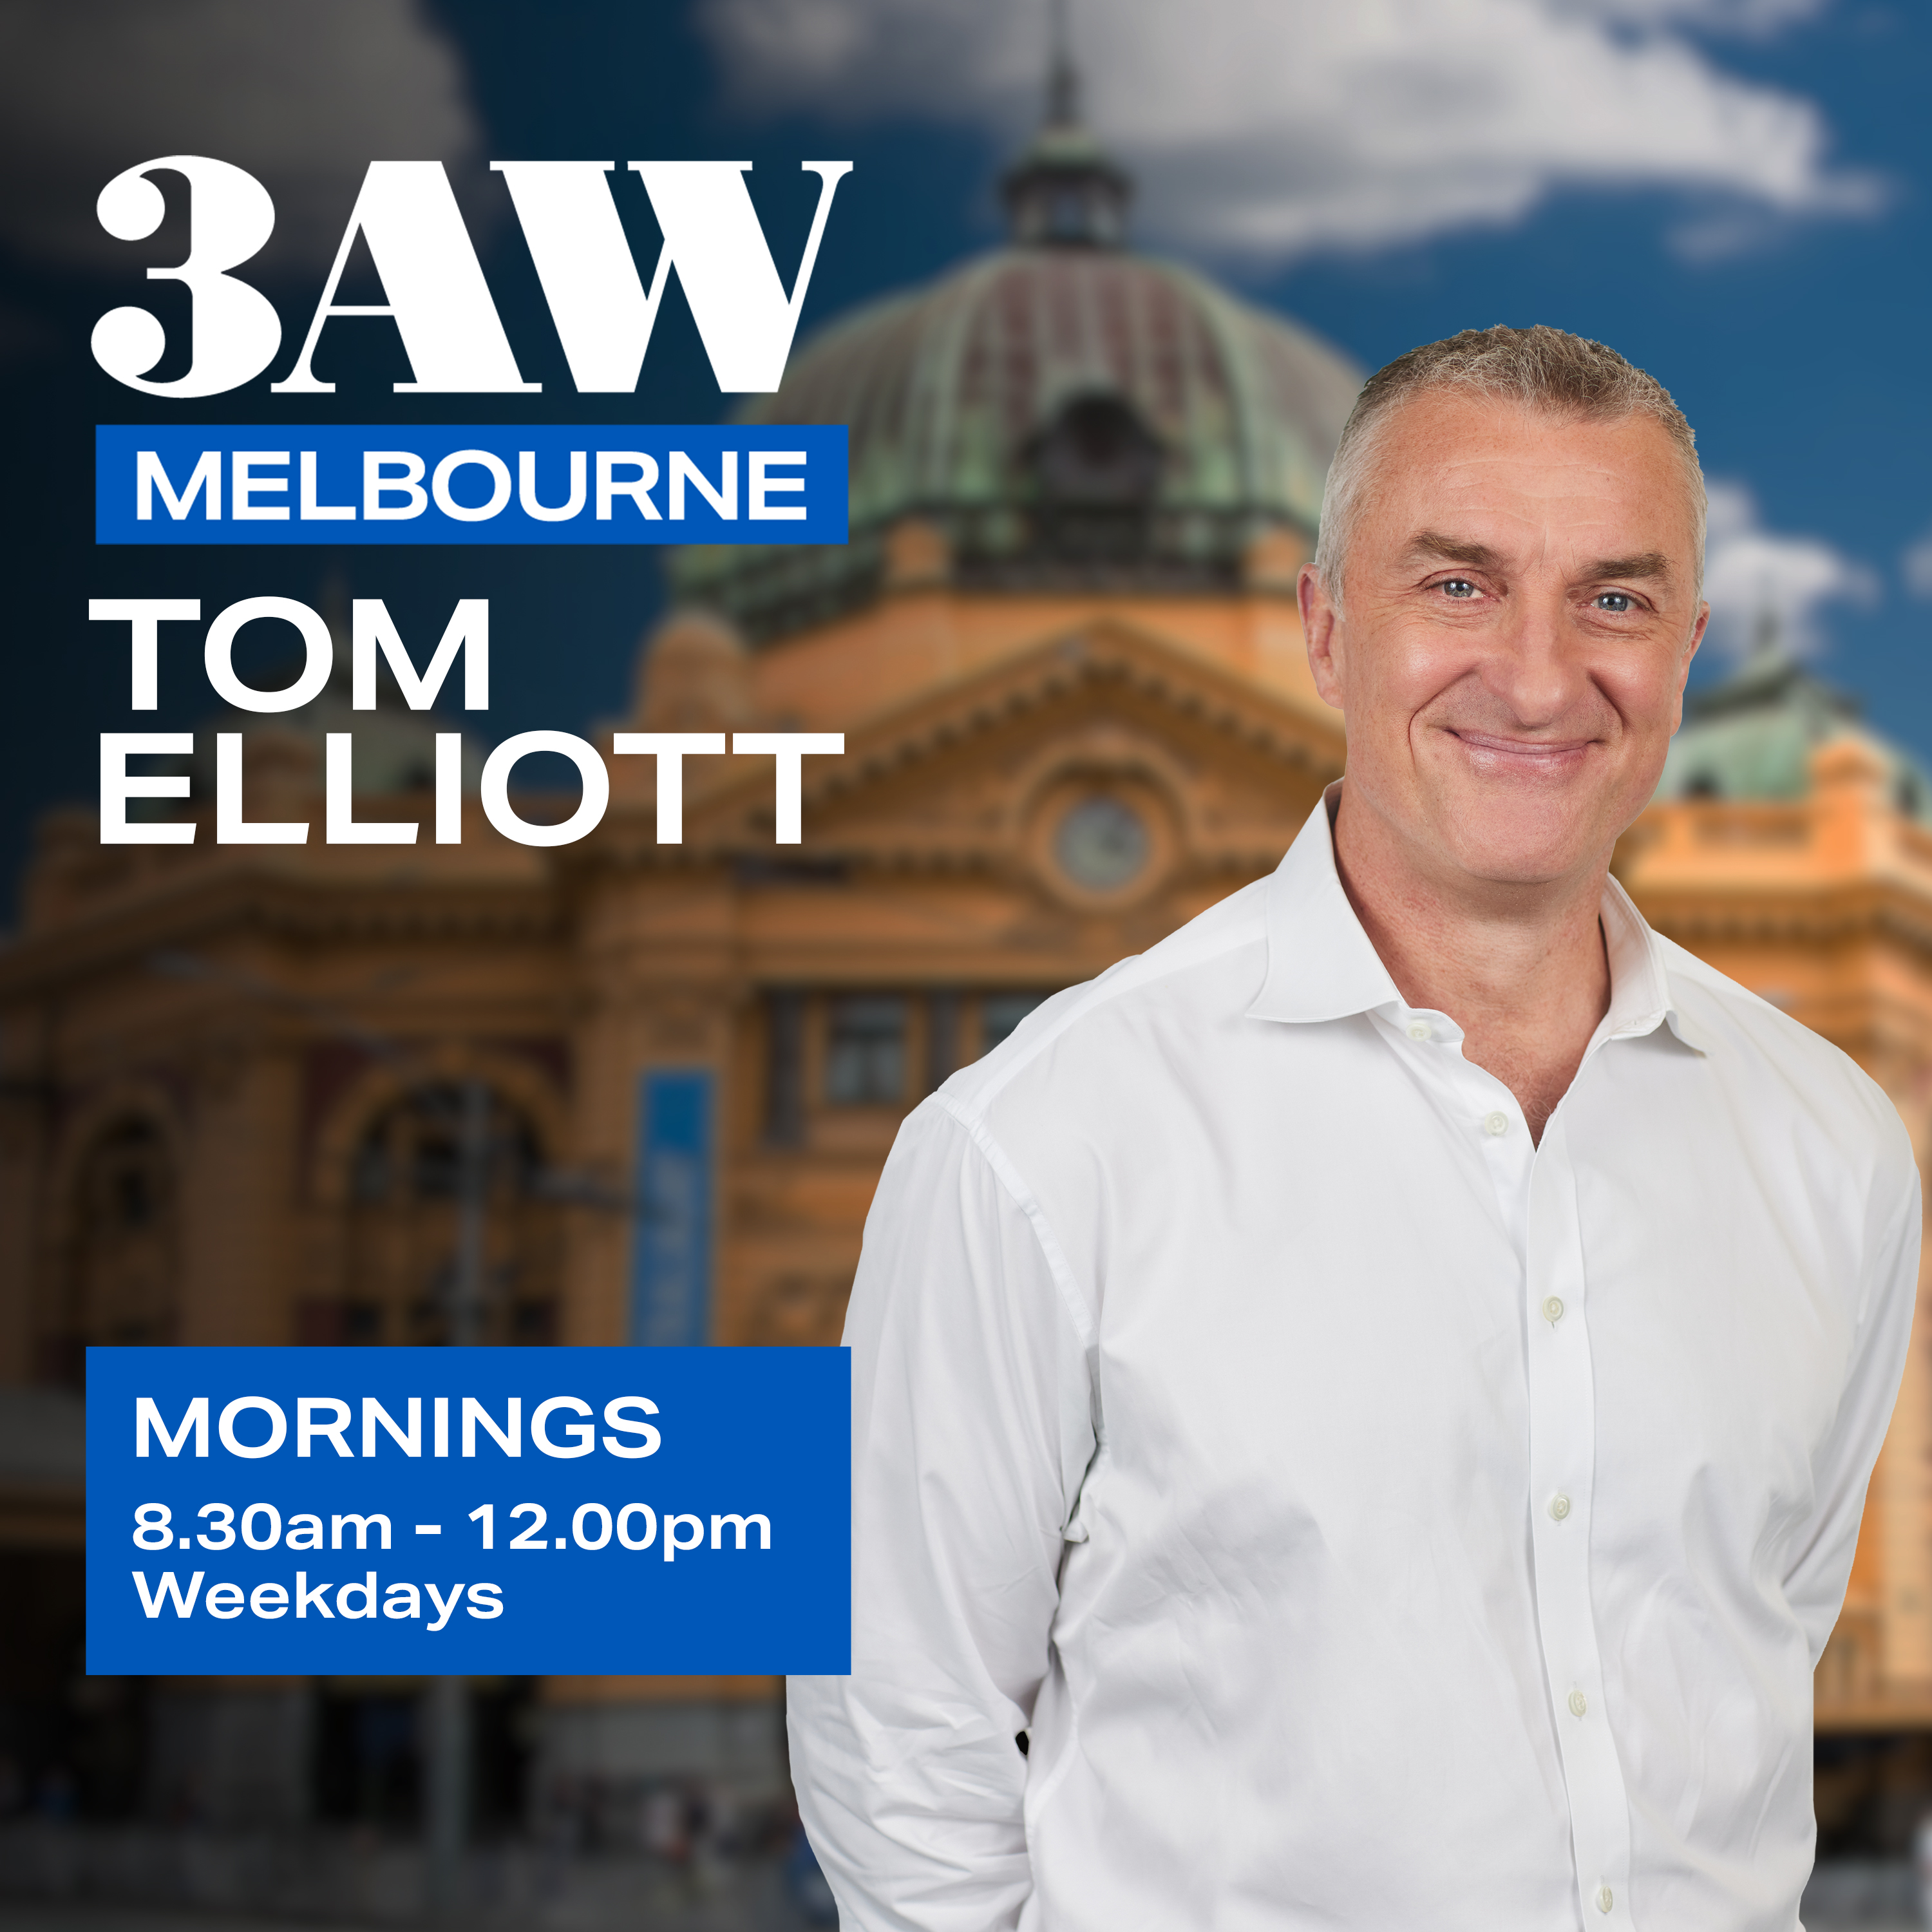 Tom Elliott on the sneaking suspicion he has over number of immigrants allowed into Australia